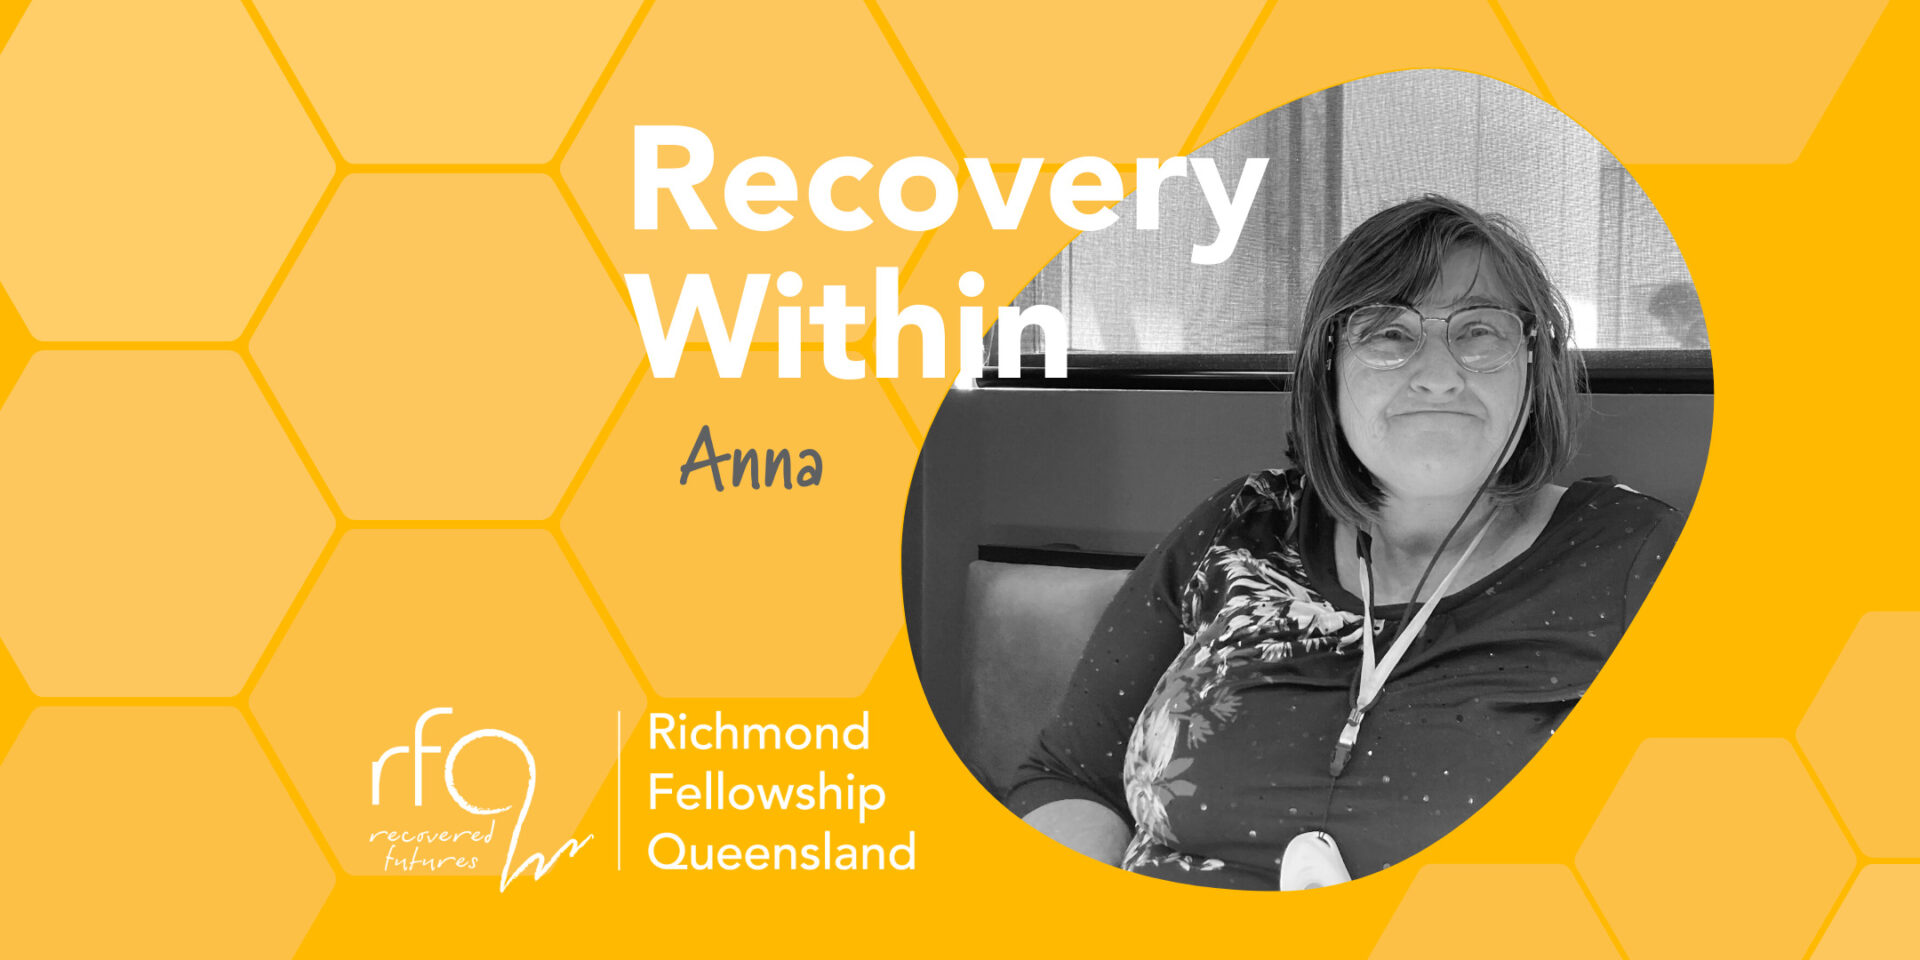 Yellow graphic with black and white image of woman and the words, 'Recovery Within Anna' pictured